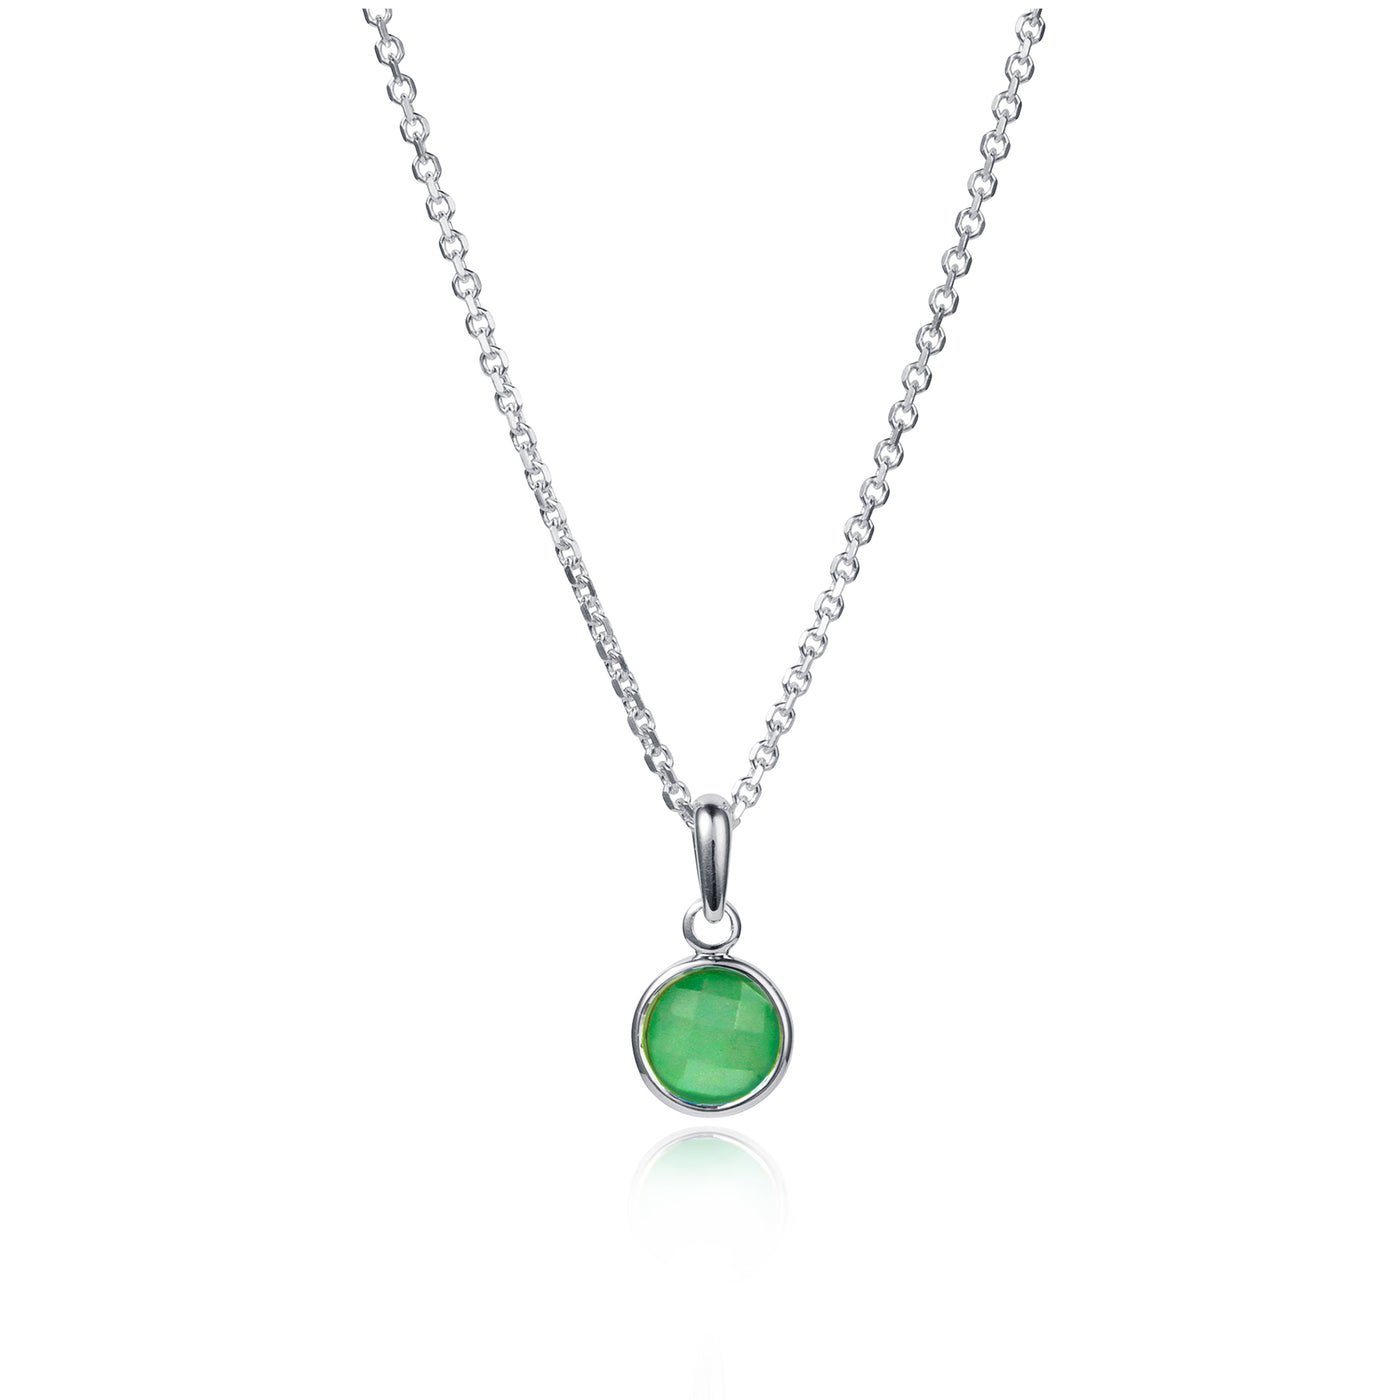 May Birthstone Necklace in Green Quartz and Silver